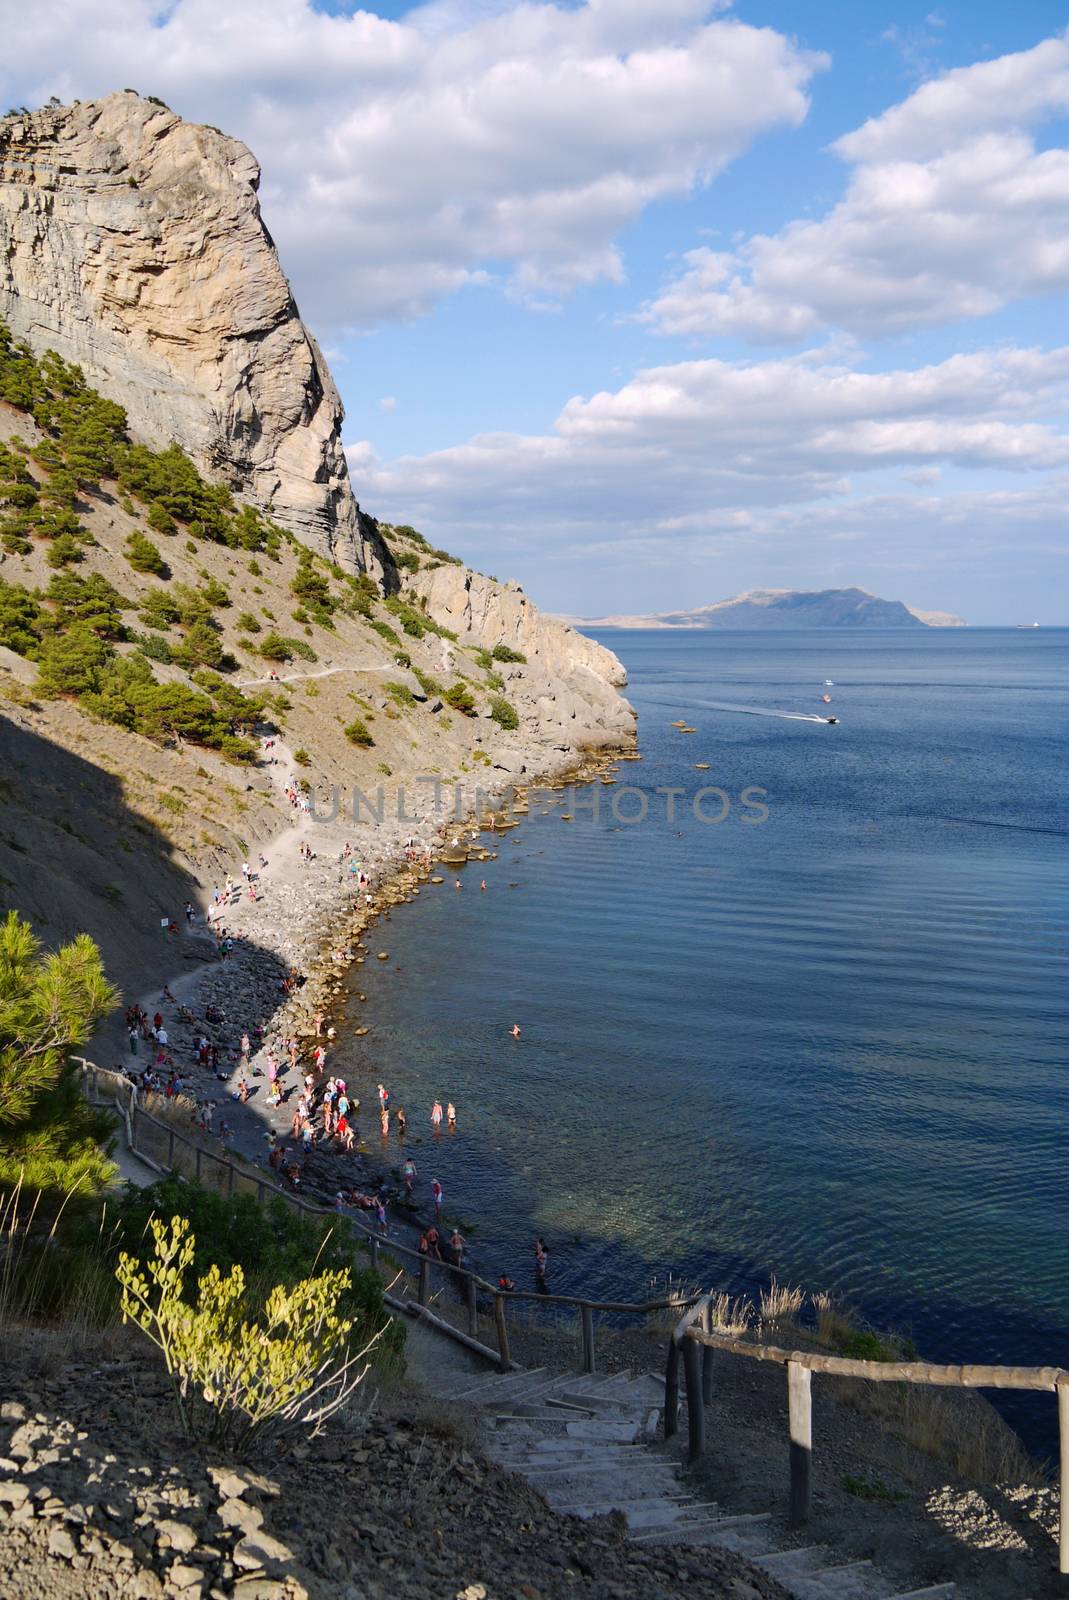 beautiful Crimean slopes on the shore of the Black sea.Tipping on the beach by Adamchuk